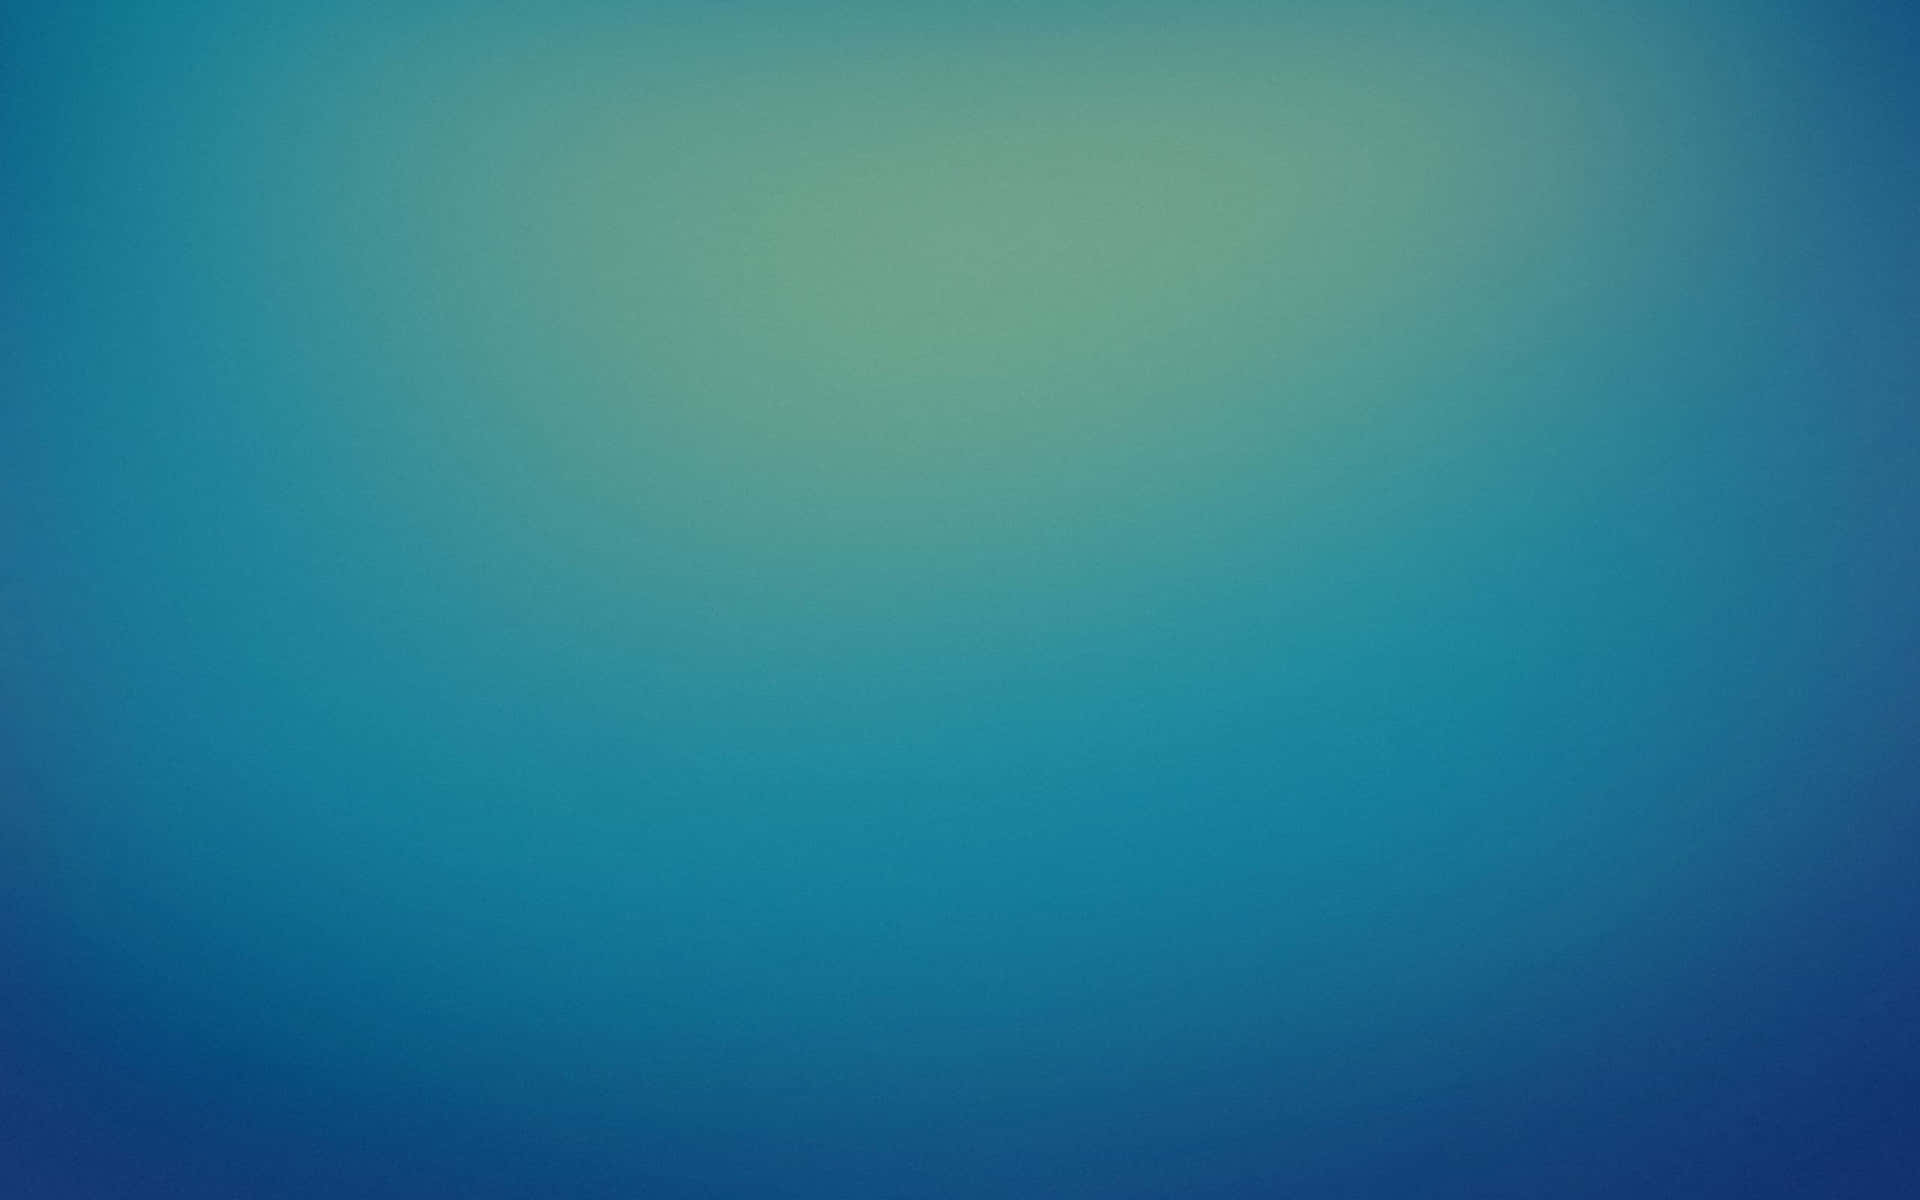 A Blue And Green Blurred Background Wallpaper